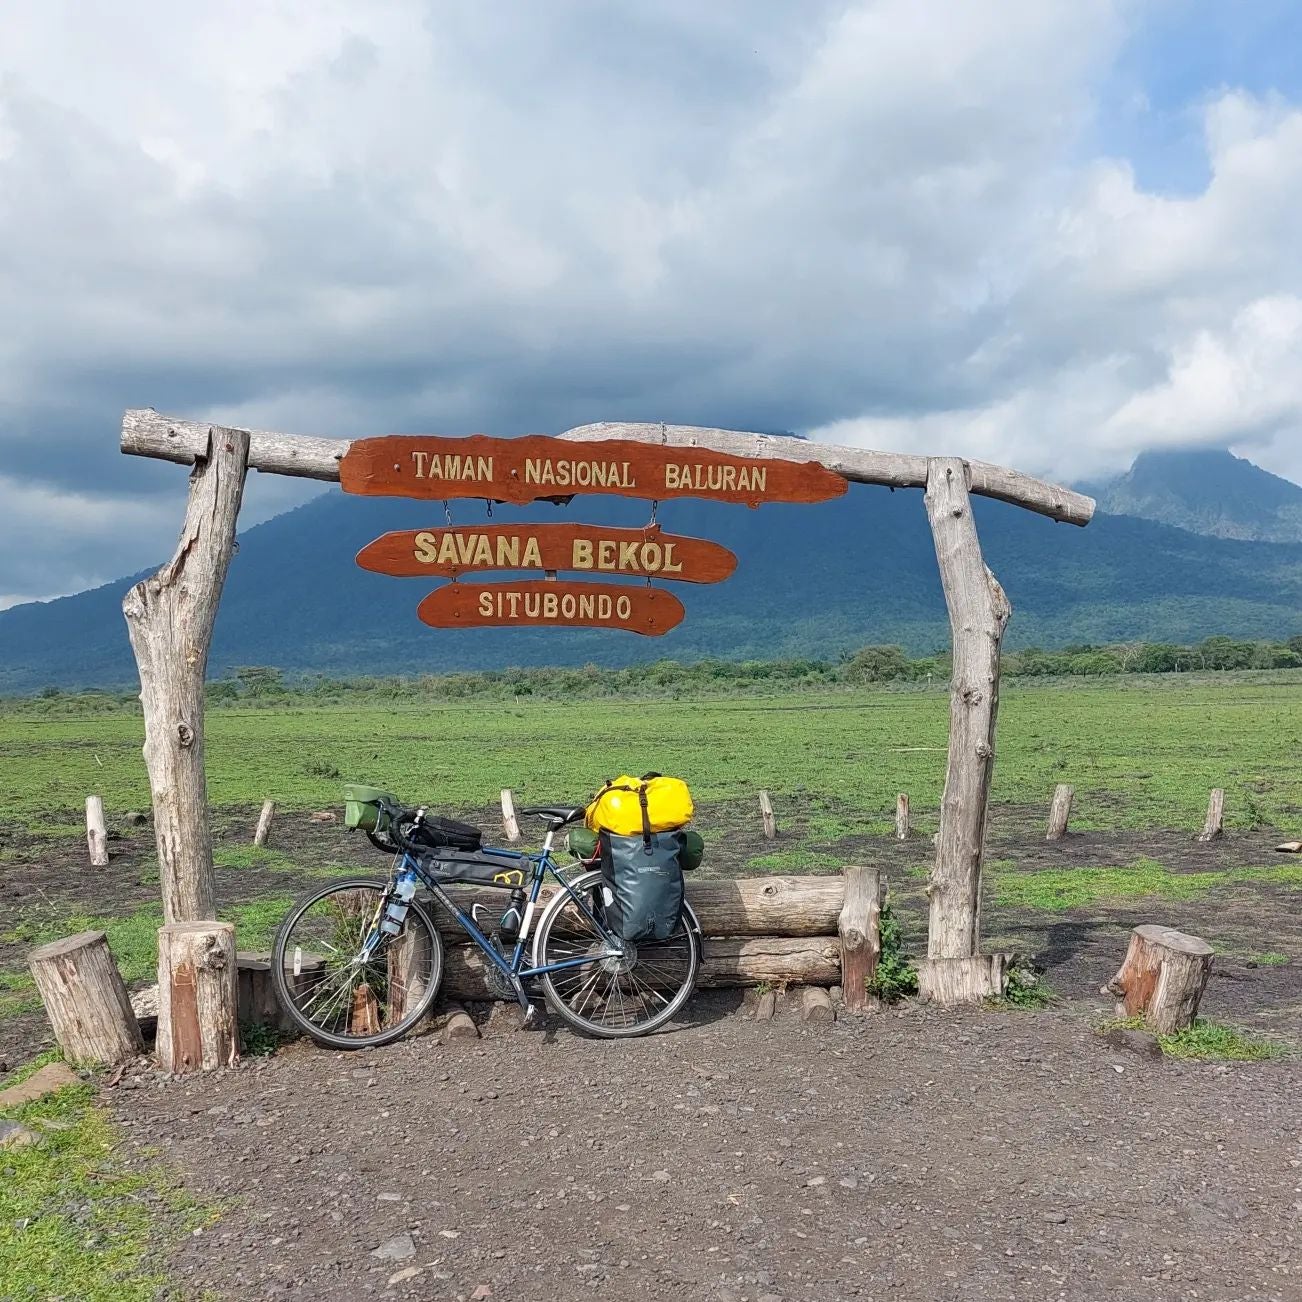 A bicycle with multiple bags attached to its back, resting under a sign that reads: "Taman Nasional Baluran. Savana Bekol Situbondo"